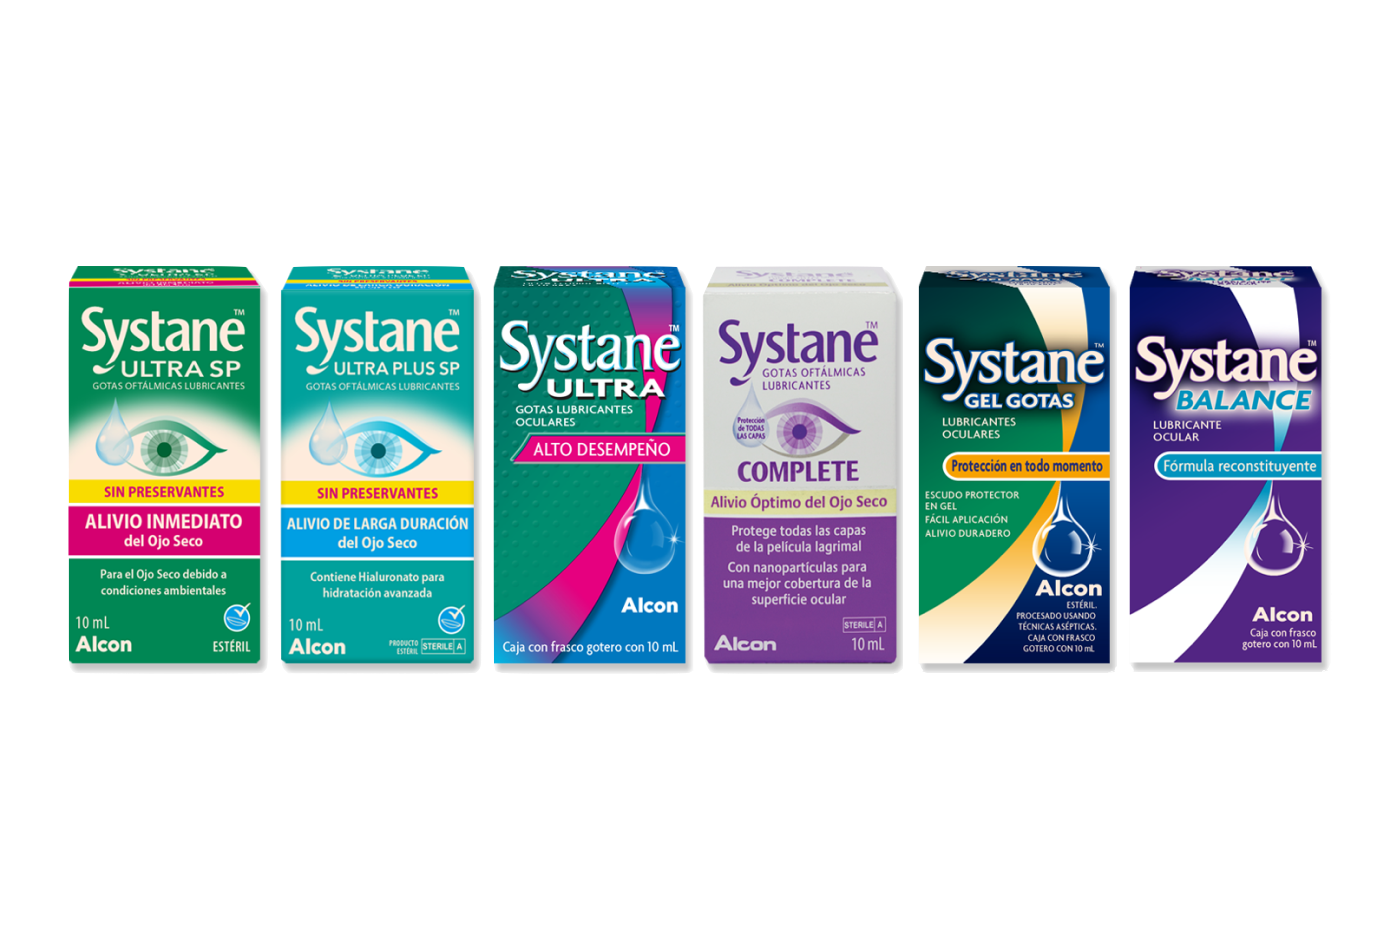 Systane product family